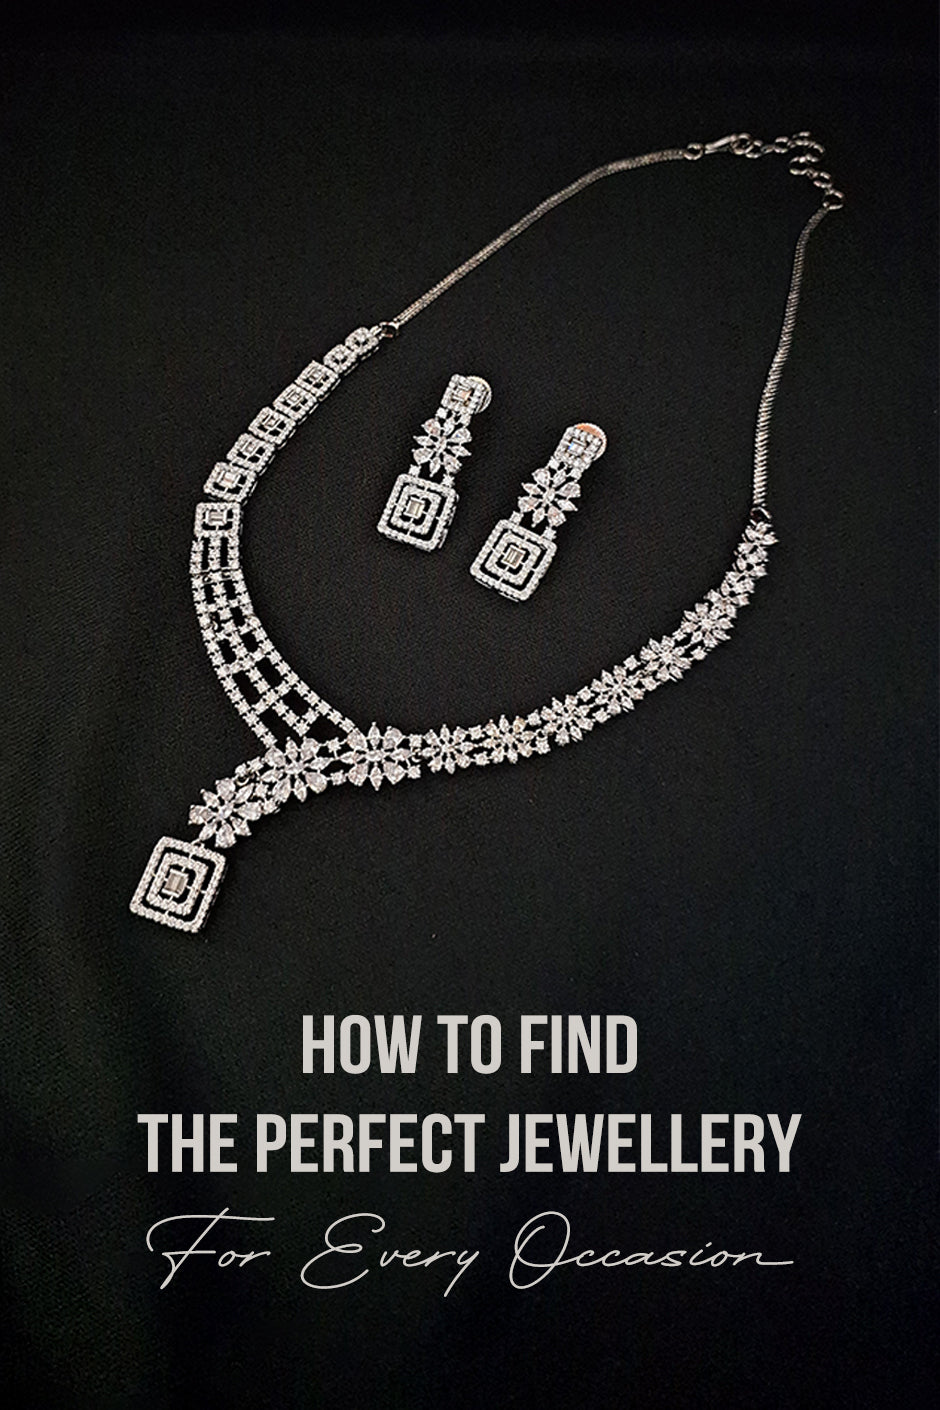 How to Find the Perfect Jewellery for Every Occasion